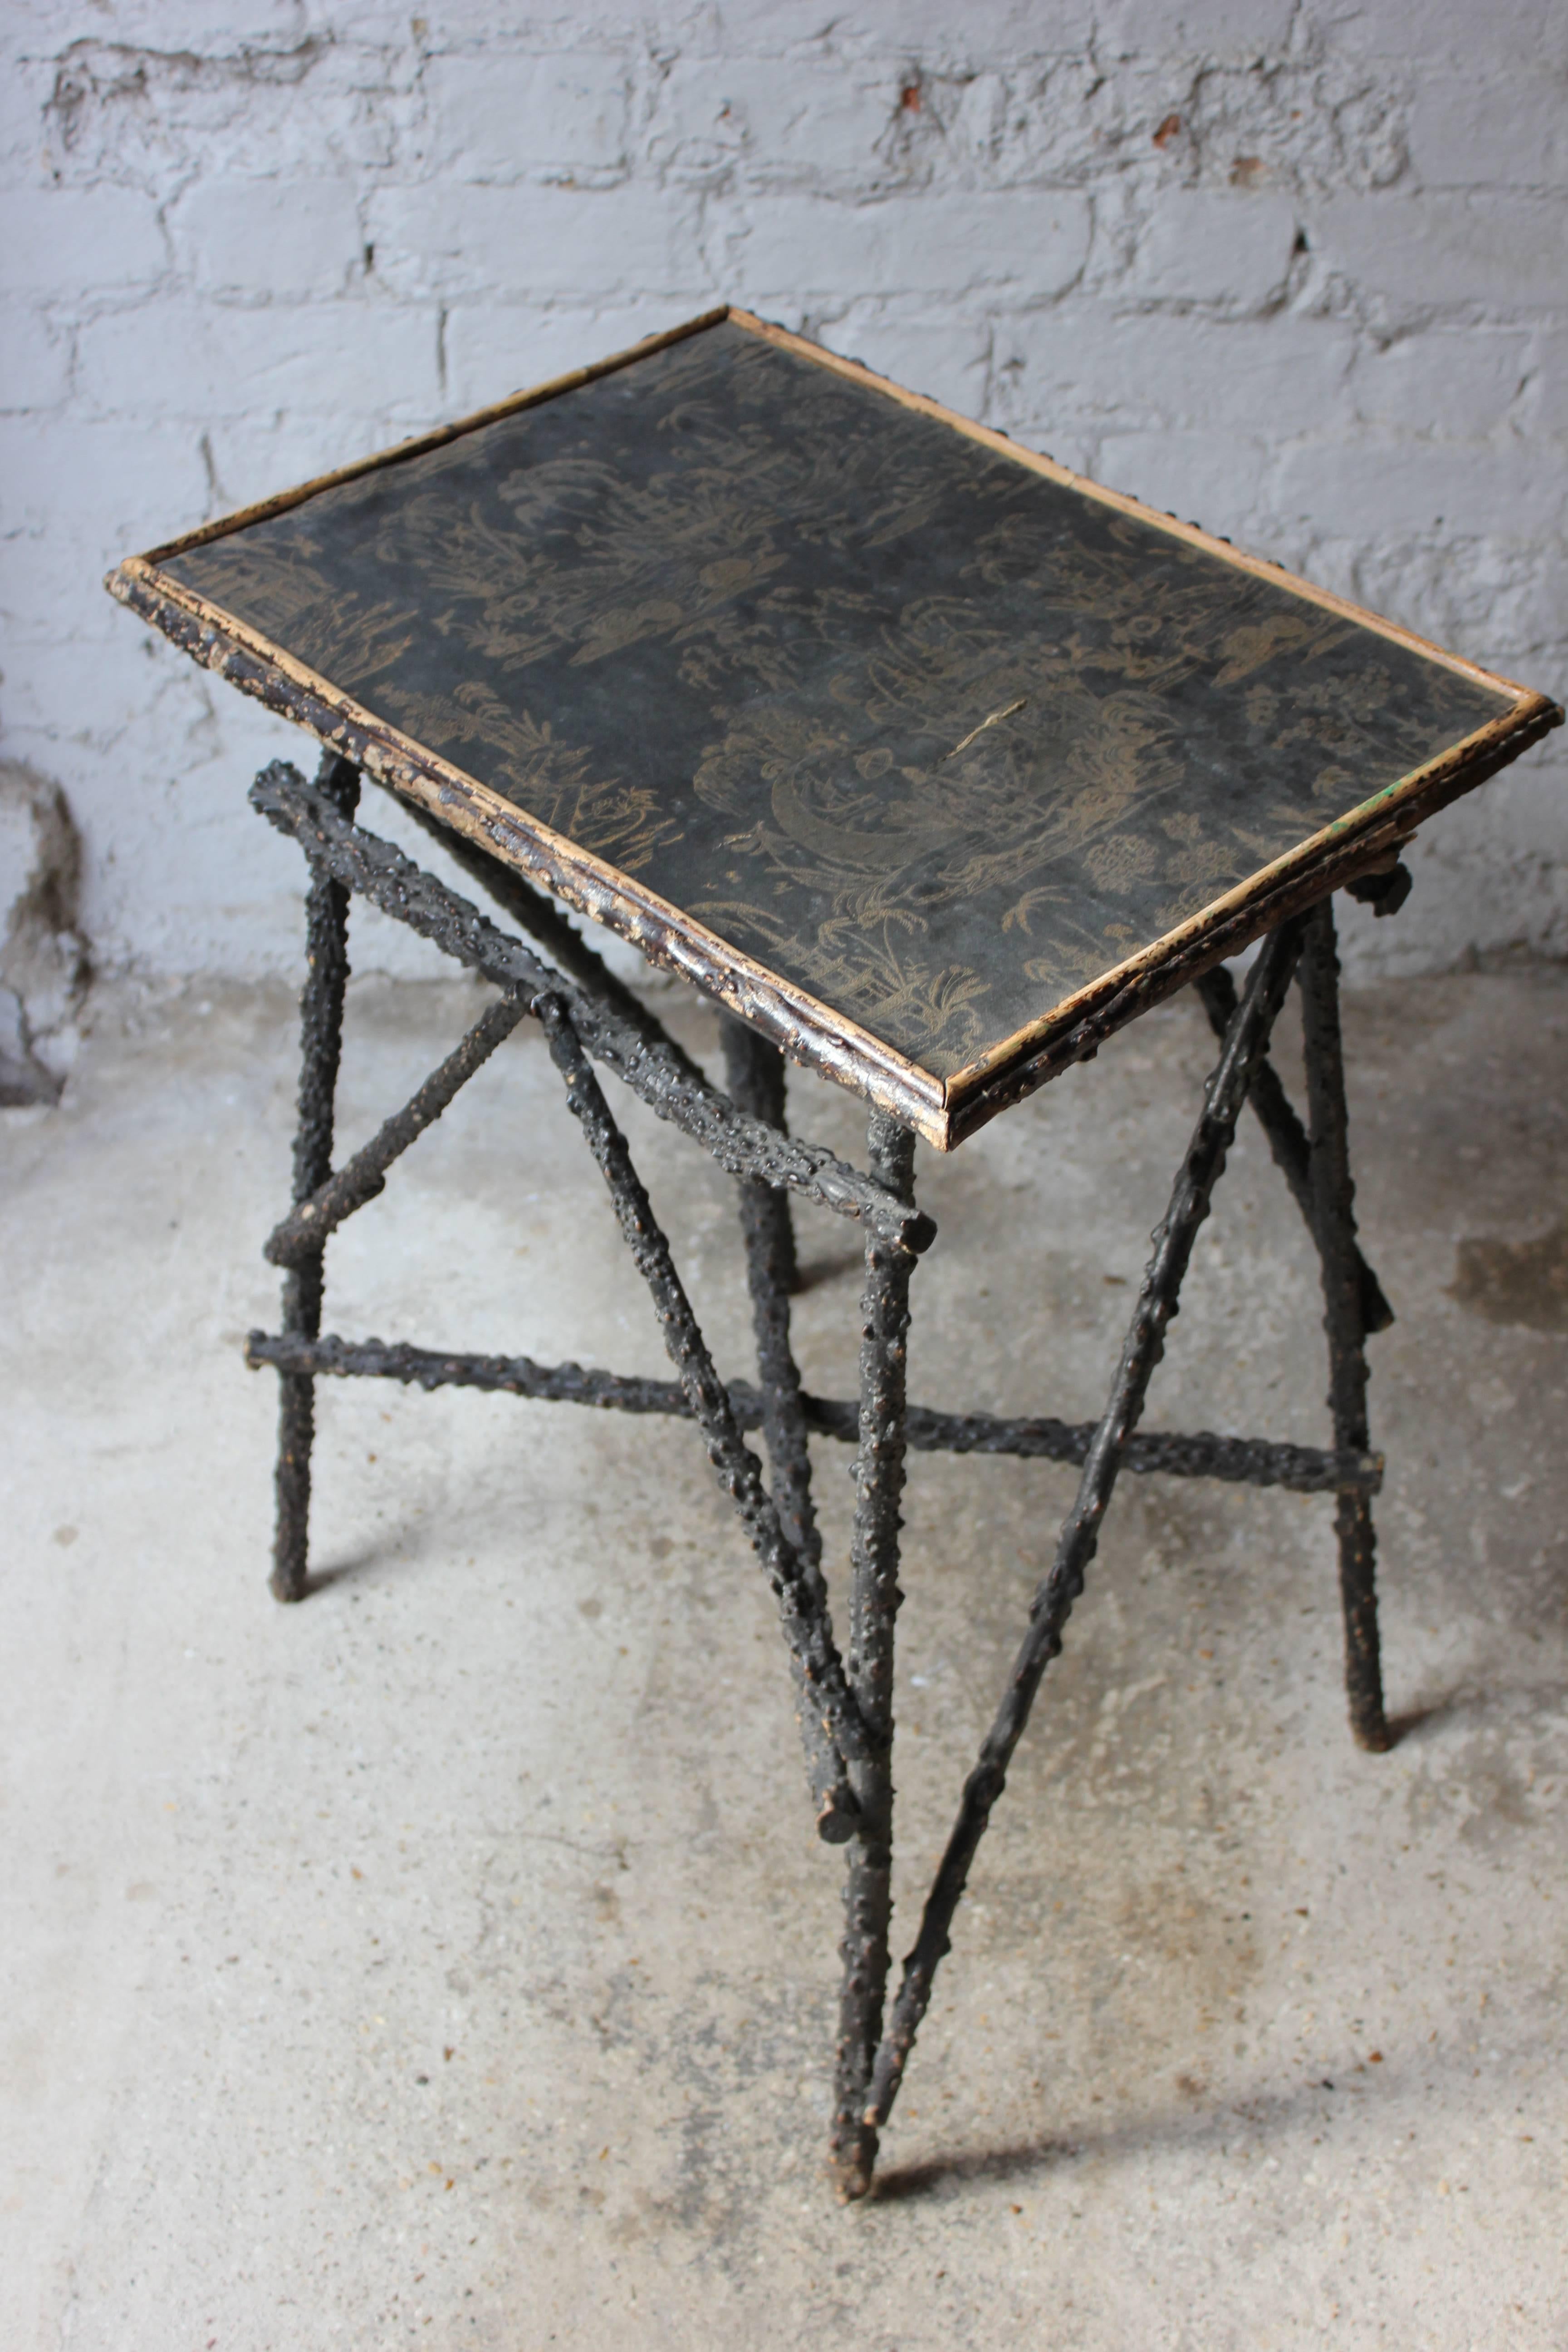 The rather rare Mid-Victorian occasional twig table having an ebony and gold chinoiserie decorated vellum(?) top on an ebonized naturalistic twig work support, the whole surviving from mid-Victorian England.

The table remains in good overall